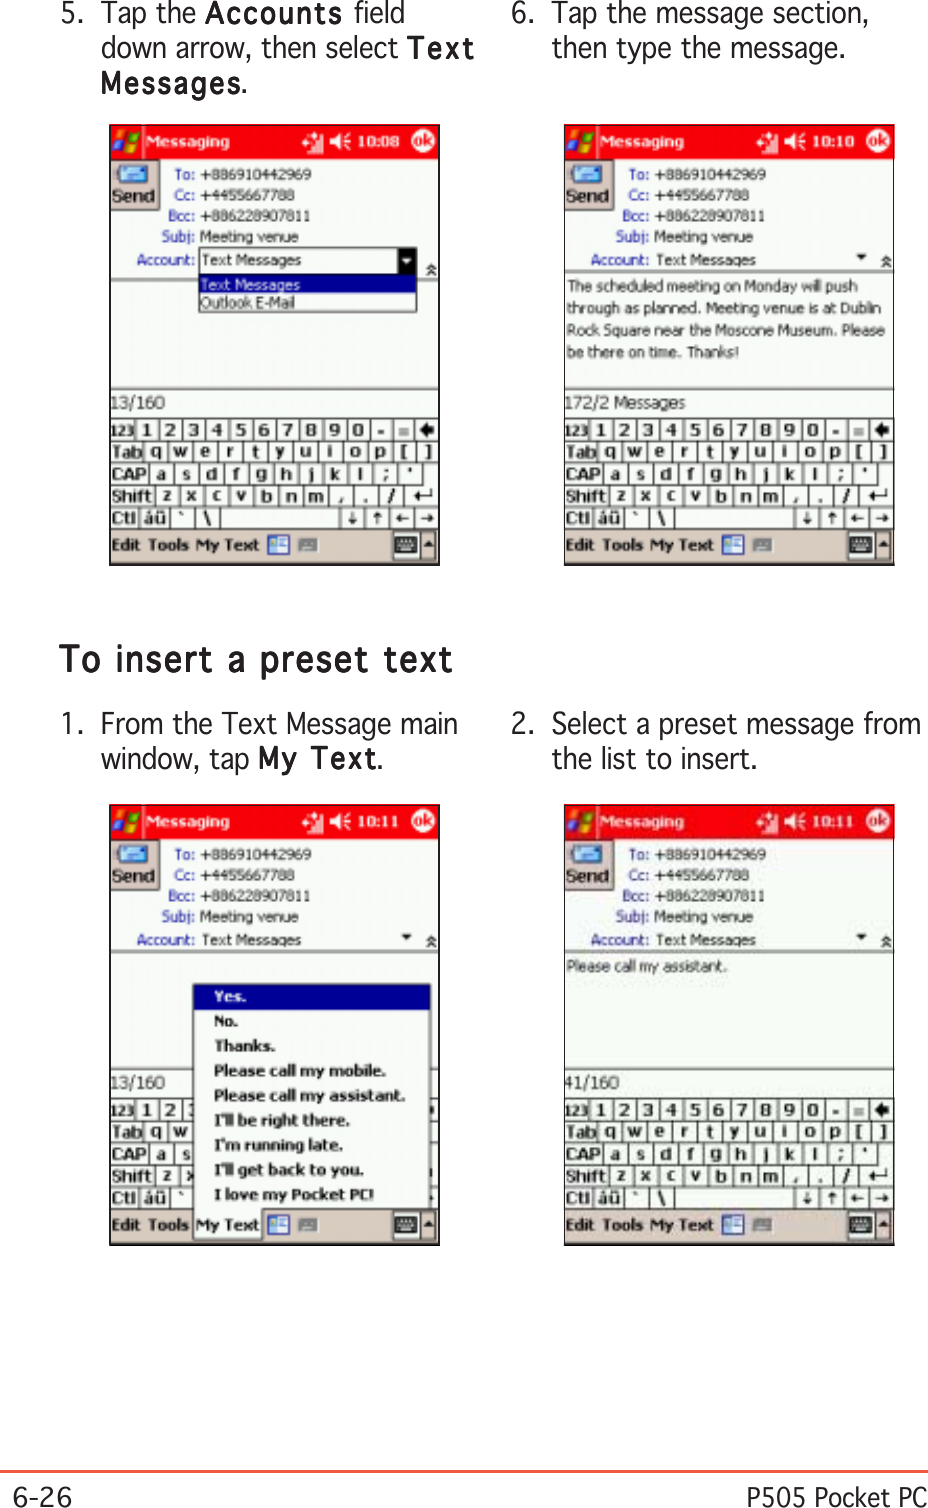 6-26P505 Pocket PC6. Tap the message section,then type the message.To insert a preset textTo insert a preset textTo insert a preset textTo insert a preset textTo insert a preset text1. From the Text Message mainwindow, tap My TextMy TextMy TextMy TextMy Text.2. Select a preset message fromthe list to insert.5. Tap the AccountsAccountsAccountsAccountsAccounts fielddown arrow, then select TextTextTextTextTextMessagesMessagesMessagesMessagesMessages.